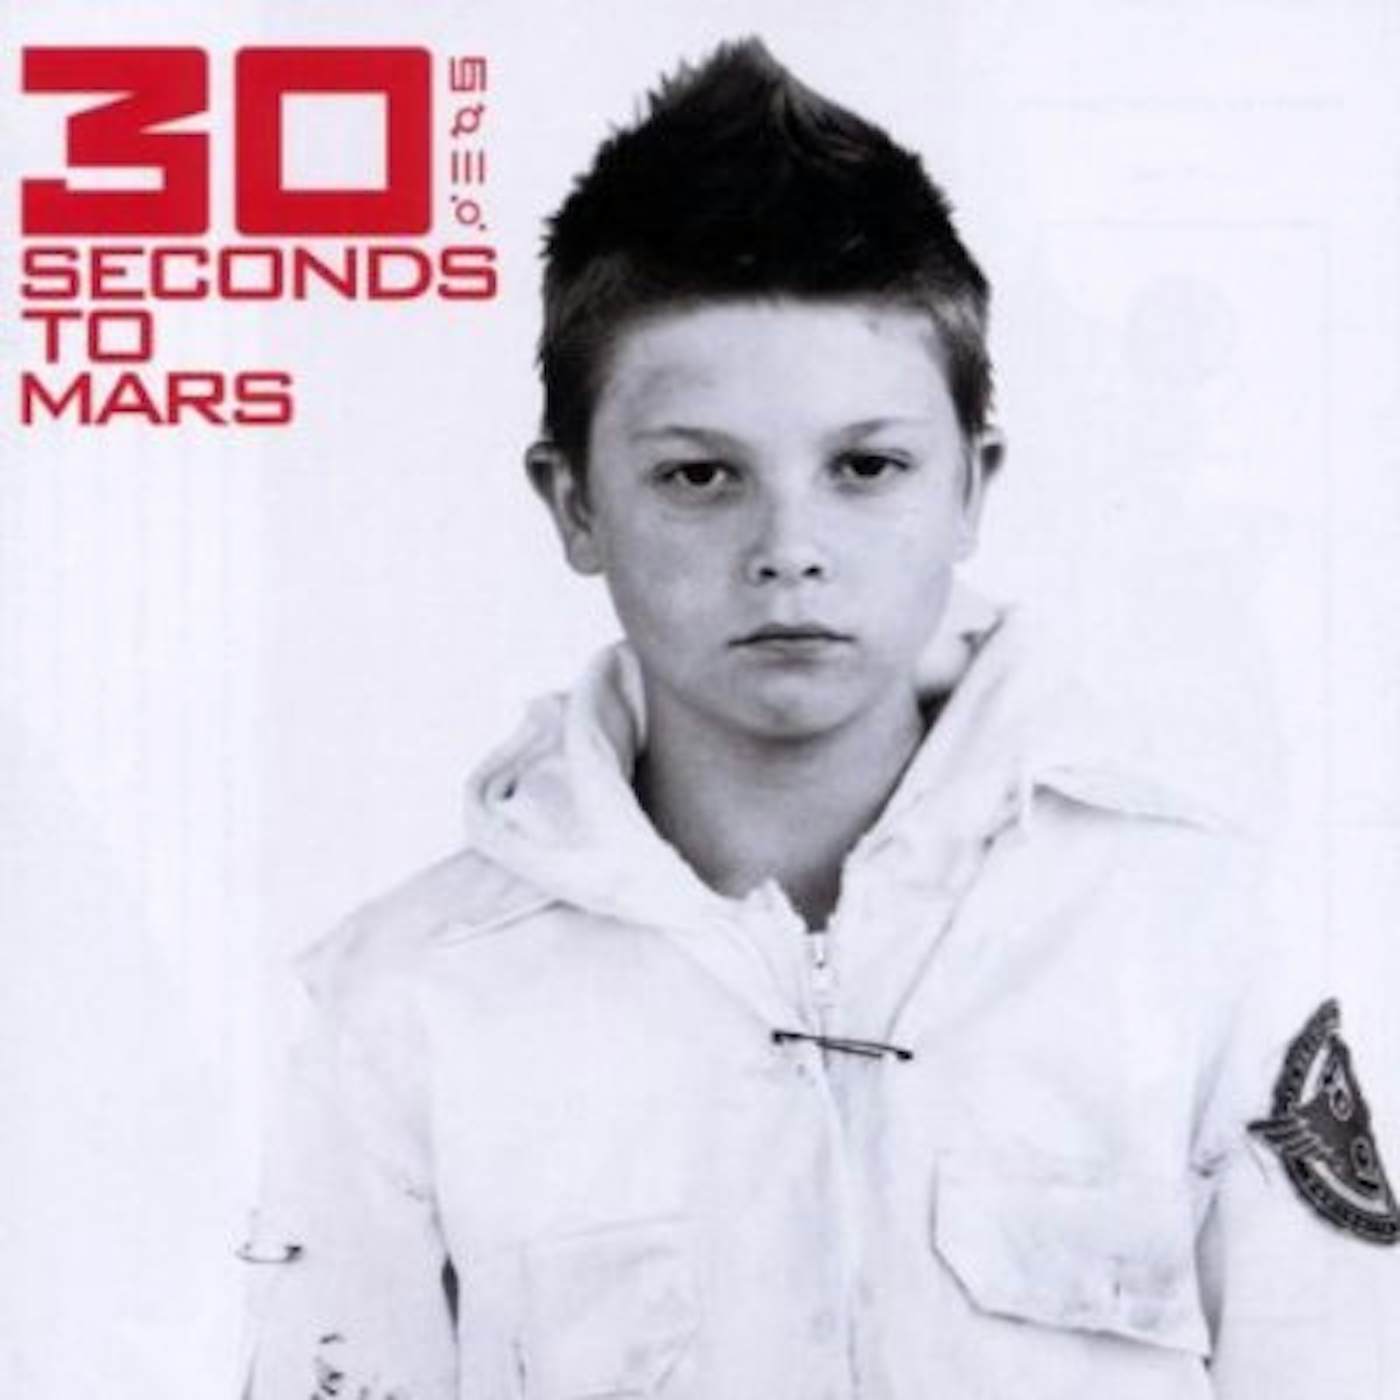 THIRTY SECONDS TO MARS CD